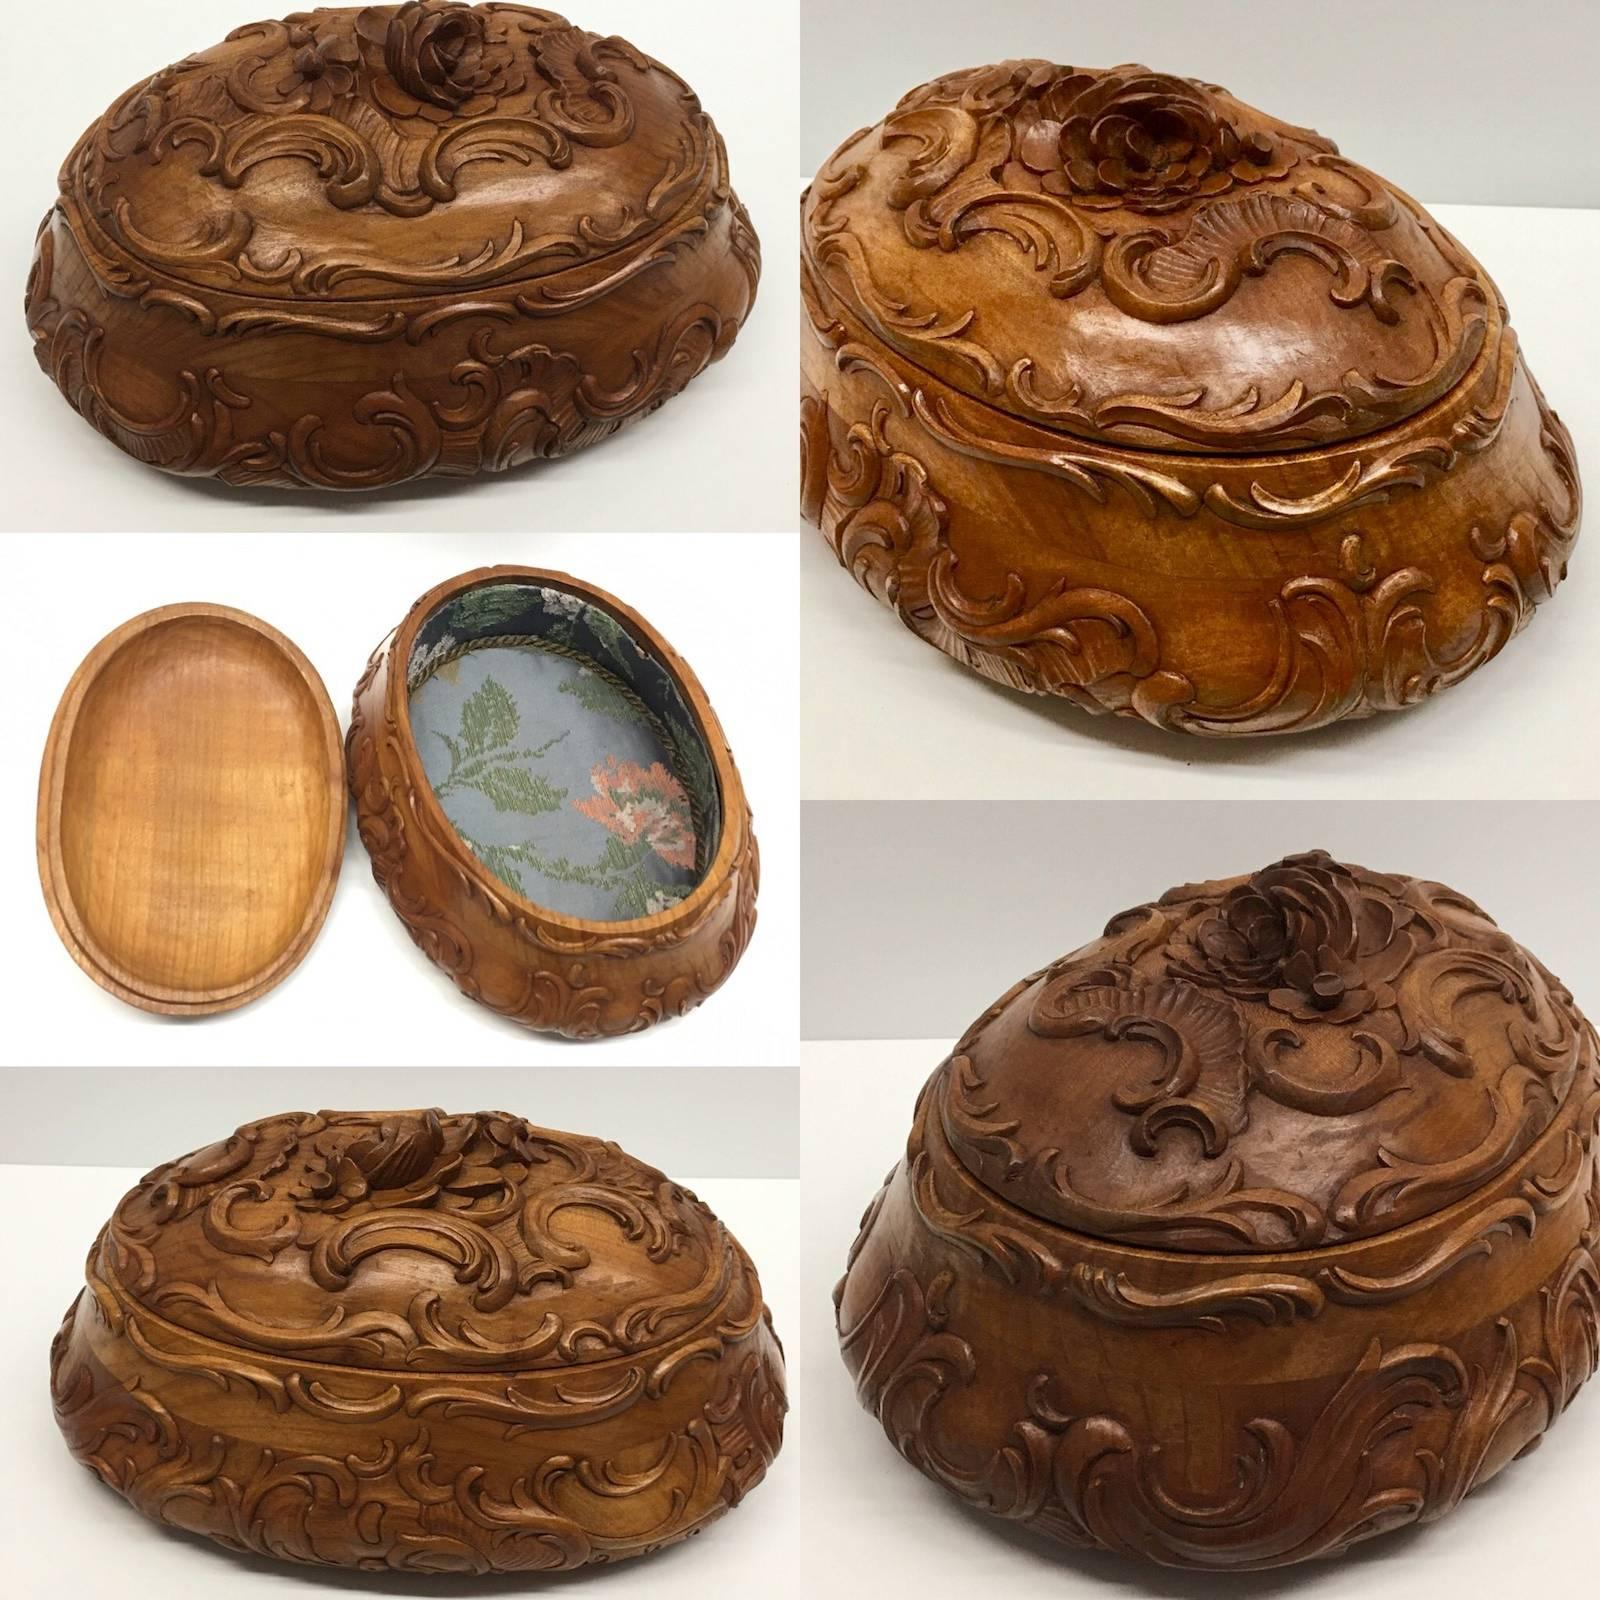 End of 19th century hand-carved box with branches and leaves and flowers. The entire box is hand-carved, with more leafs and flowers decoration on the lid. This is a wonderful example of Black Forest carving. This box can be used as trinket box or